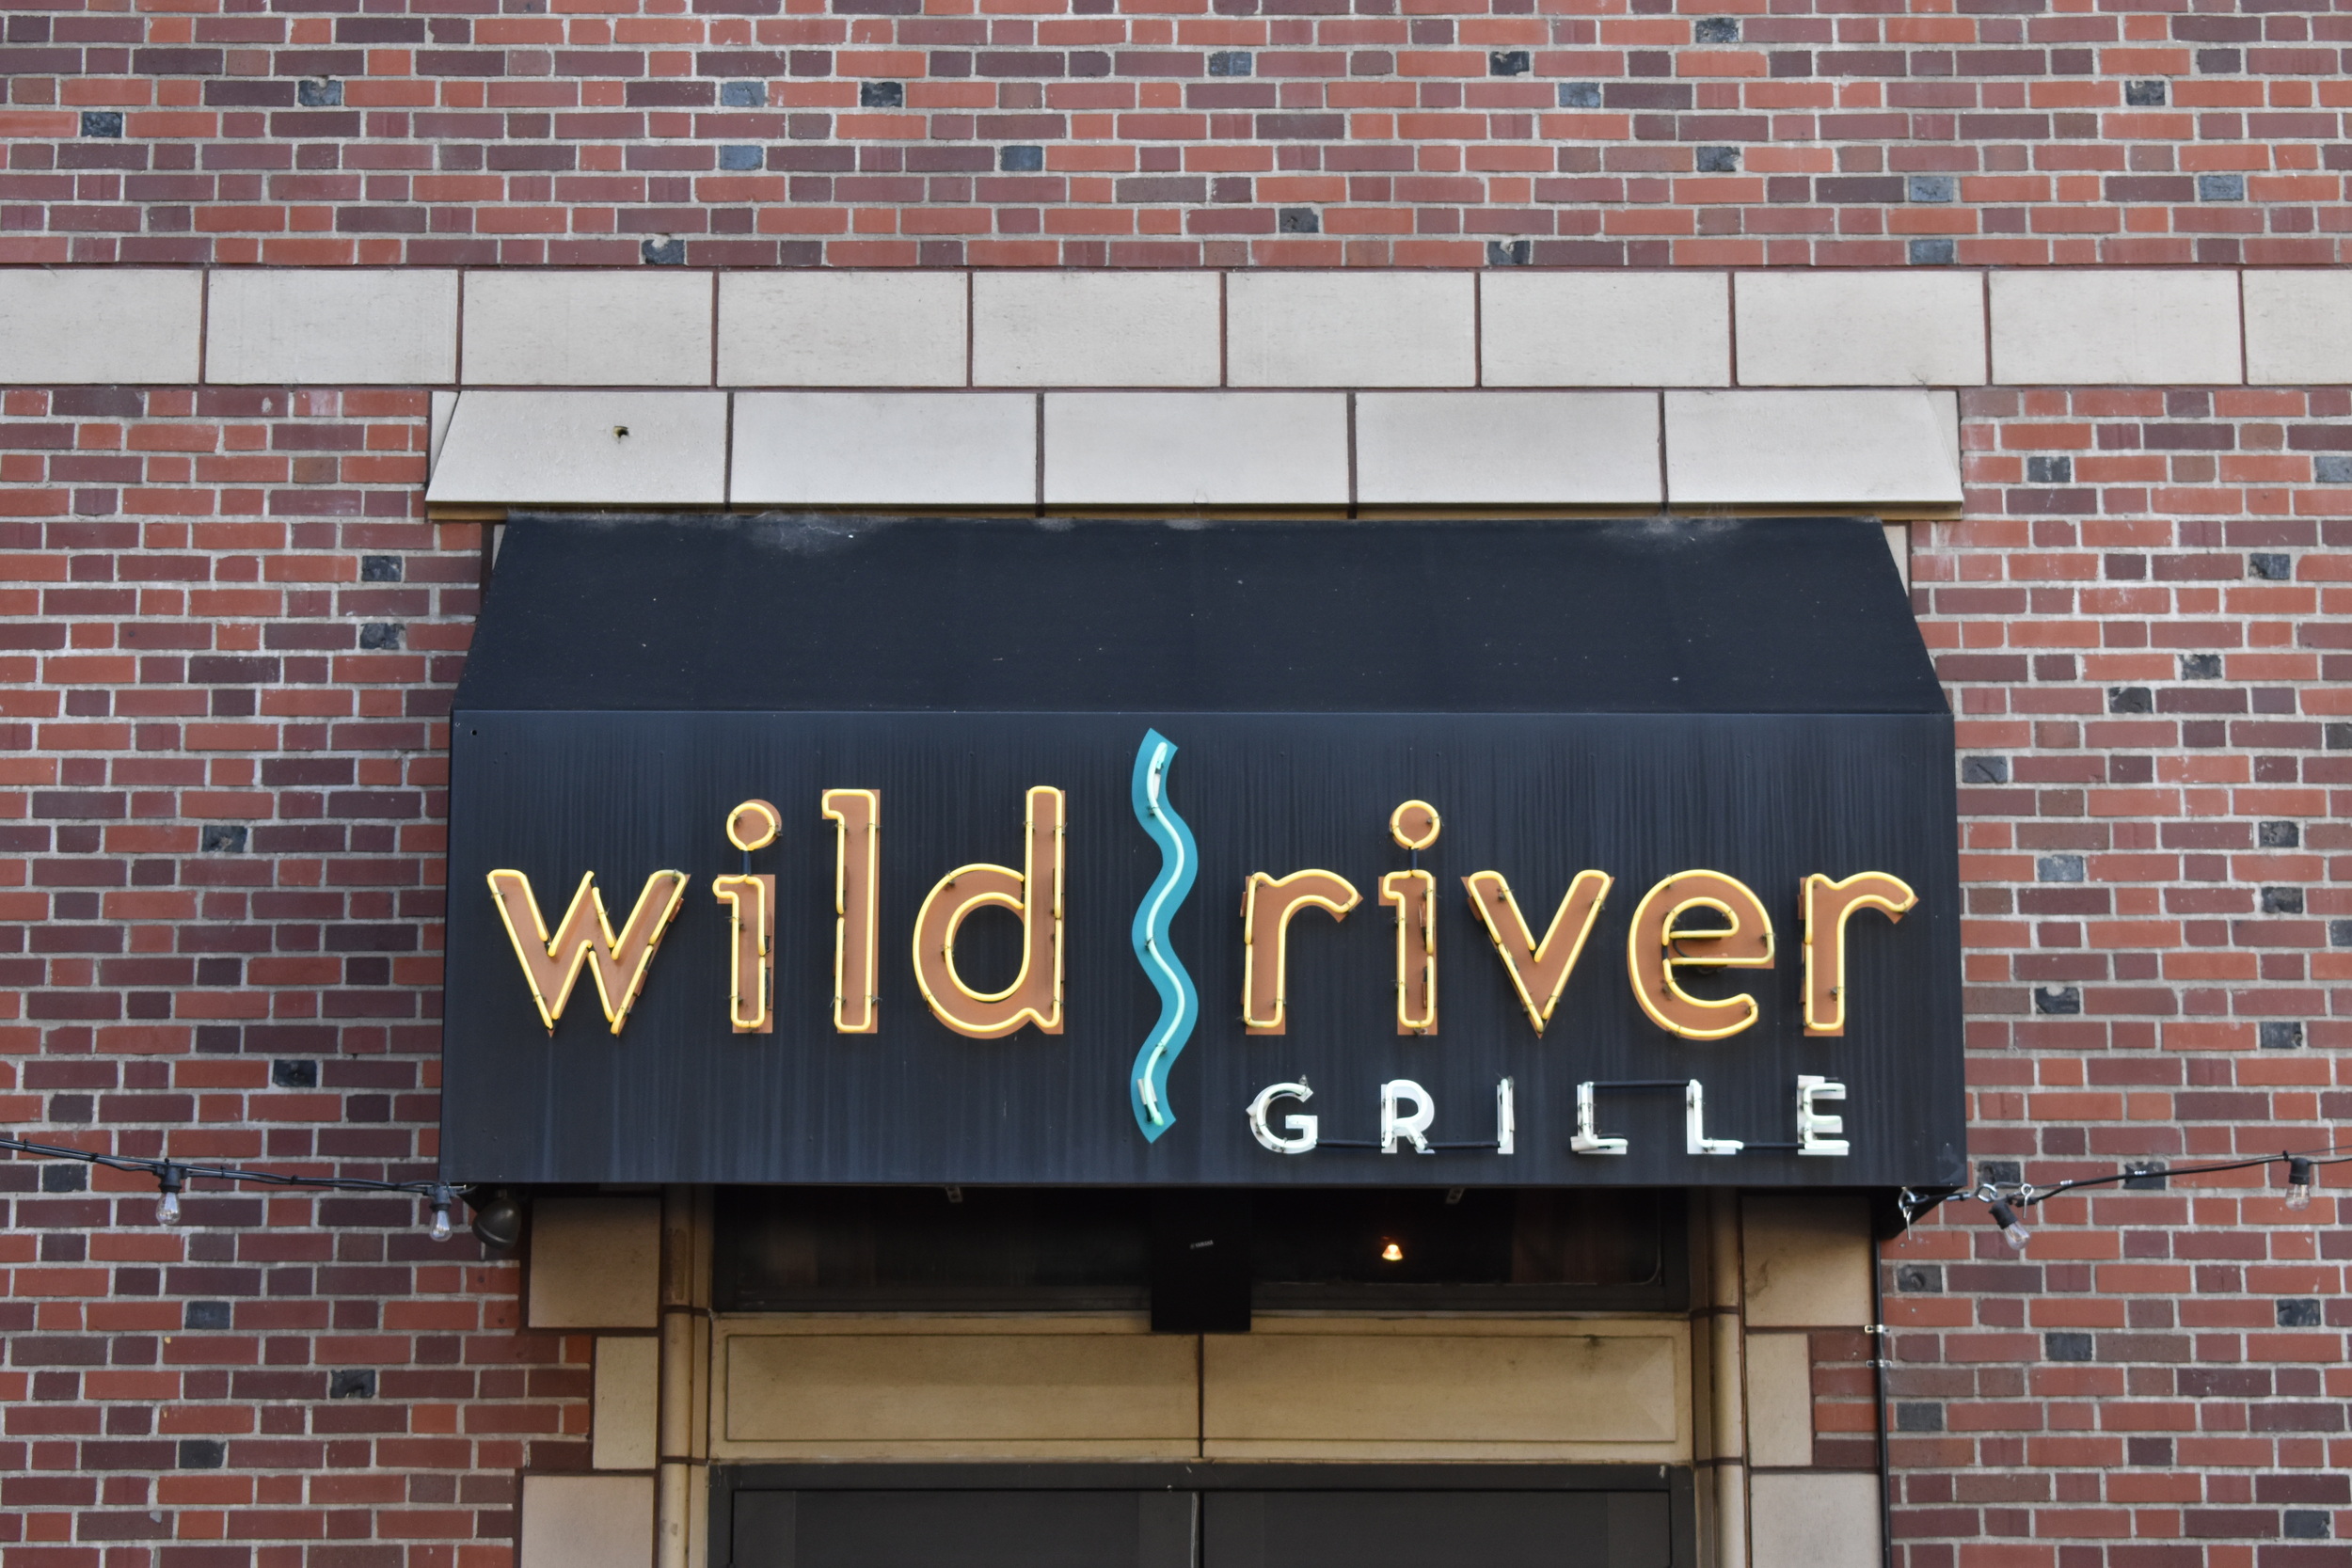 Wild River Grille wall mounted signs, Reno, Nevada